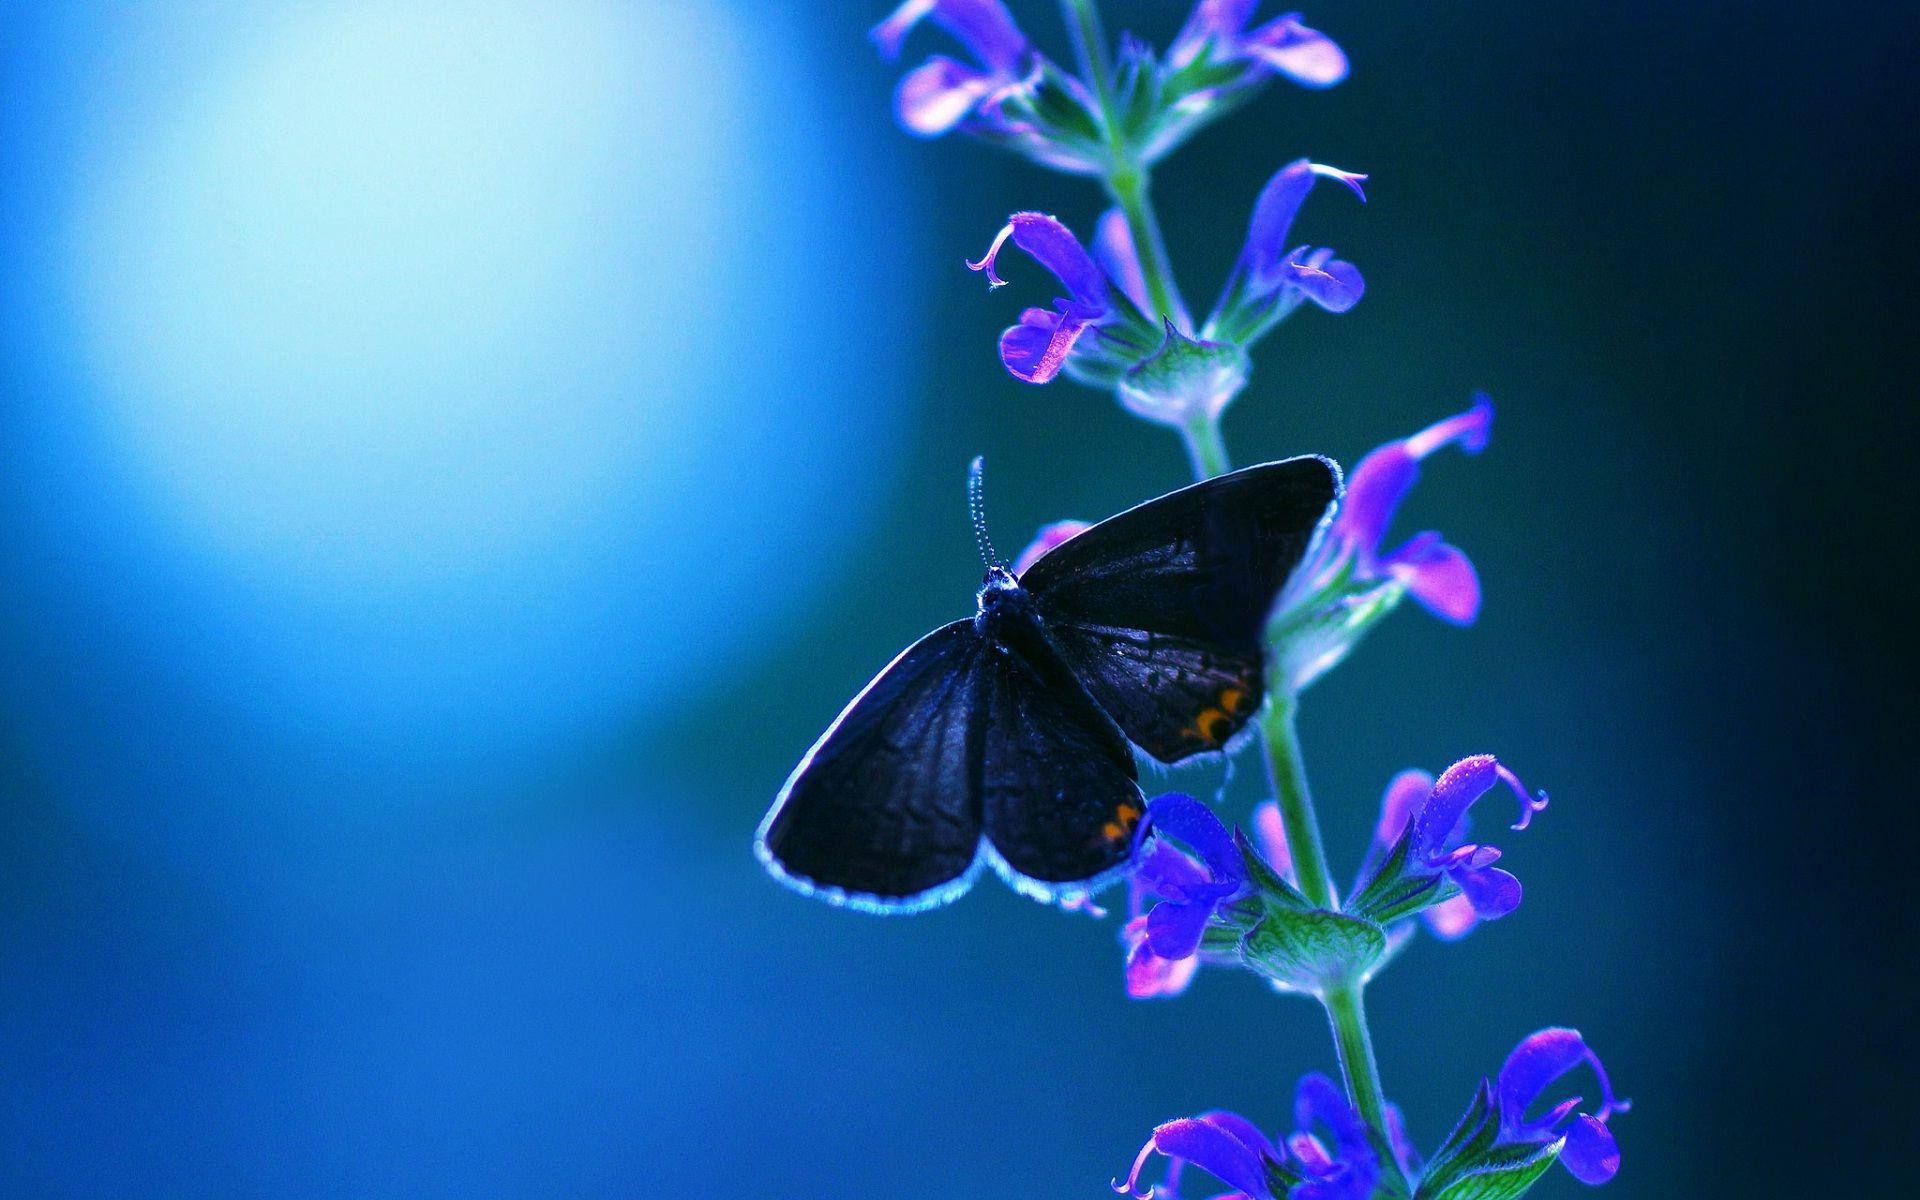 Cool night and blue butterfly and flowers wallpaper. HD Wallpaper